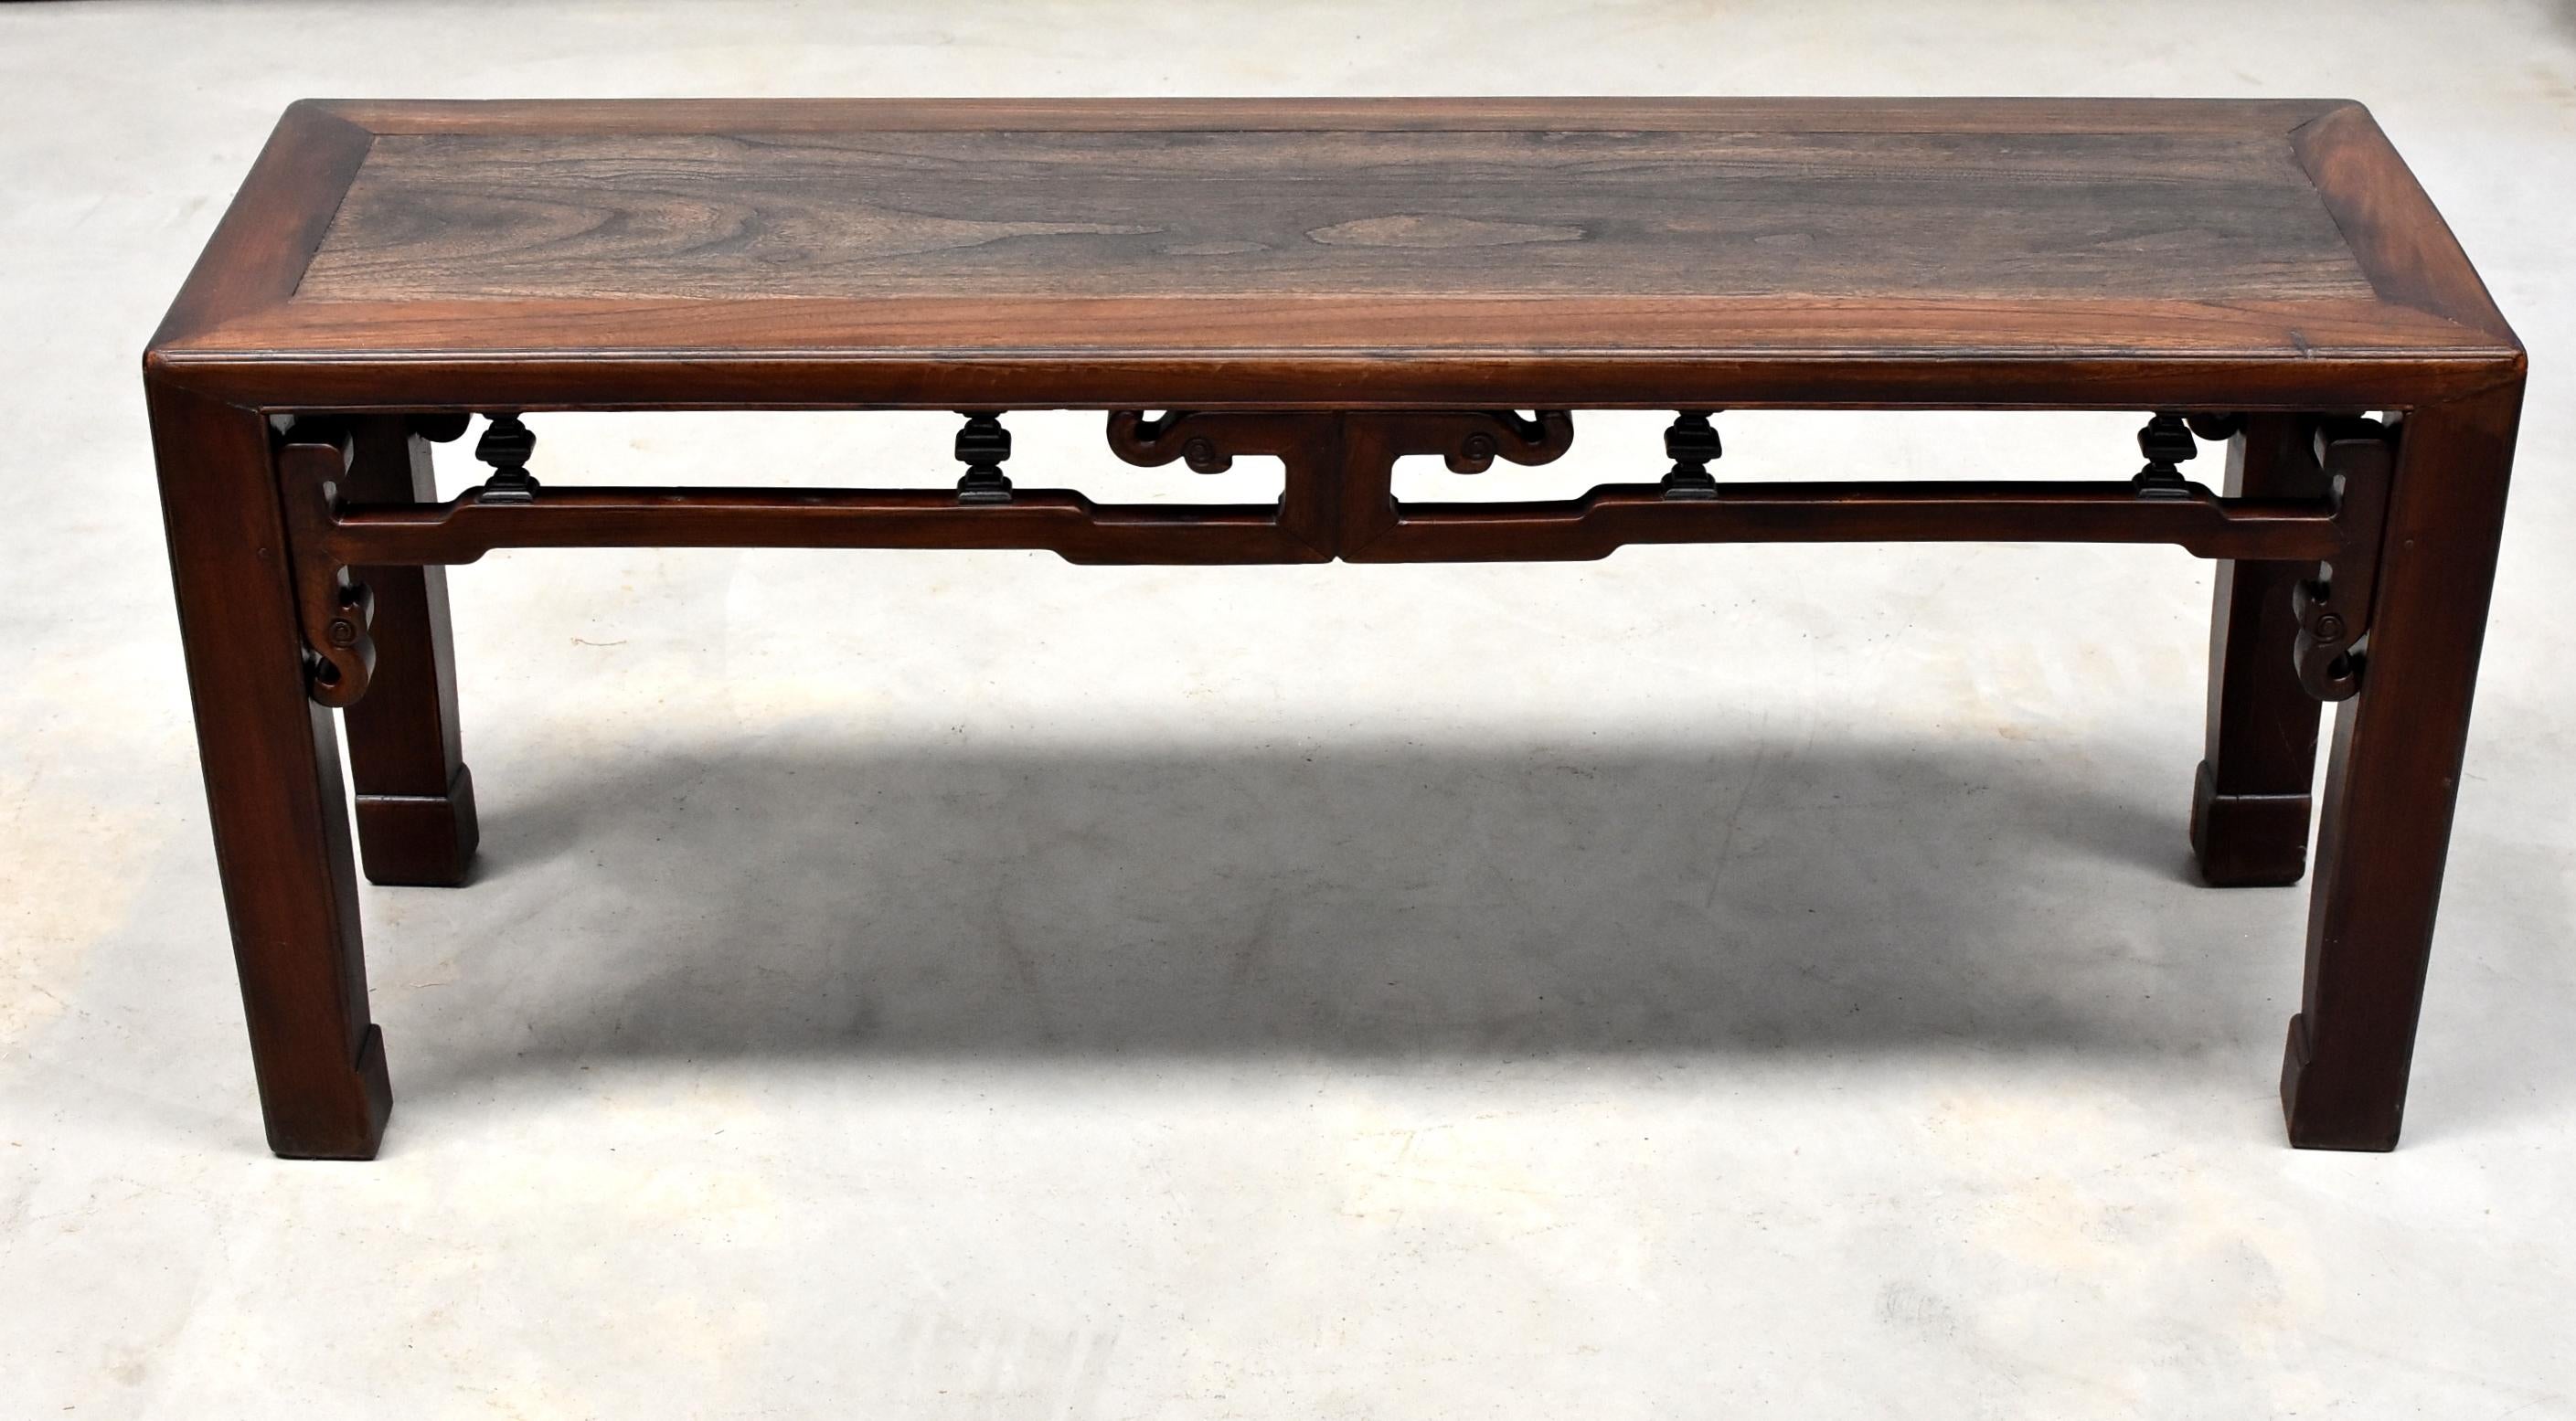 A solid wood antique Chinese spring bench. Such a bench was made in the region south of China's Yangtze River. It is sturdy and multifunctional, often used both as seating and a table. The bench is finished on all sides, featuring the traditional